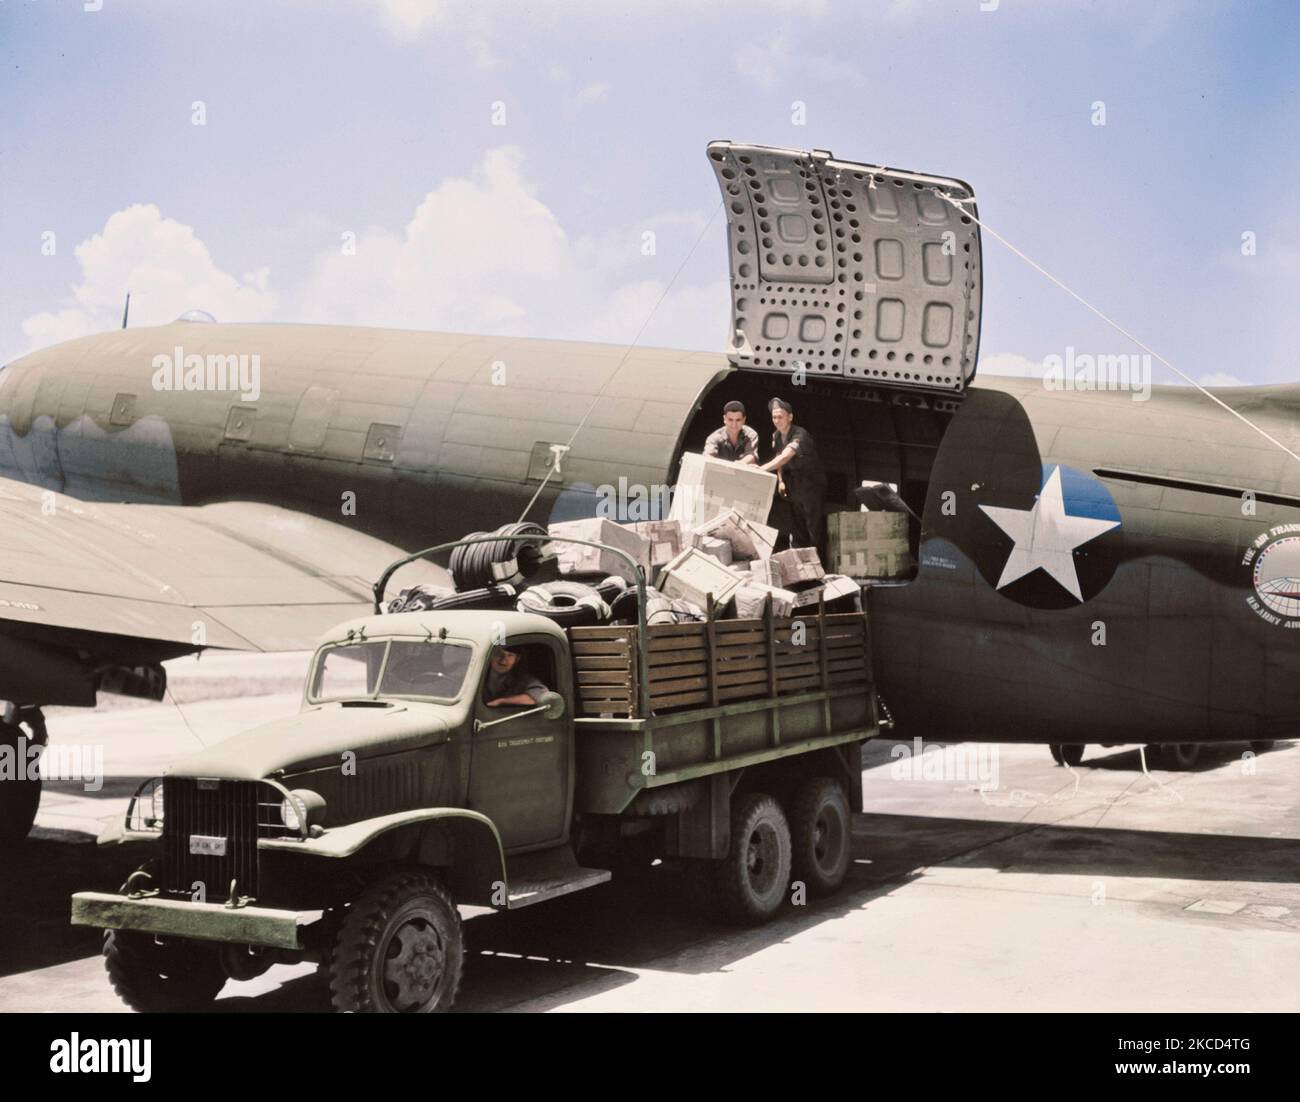 Unloading cargo from a U.S. Army Air Transport Command cargo plane, circa 1943. Stock Photo